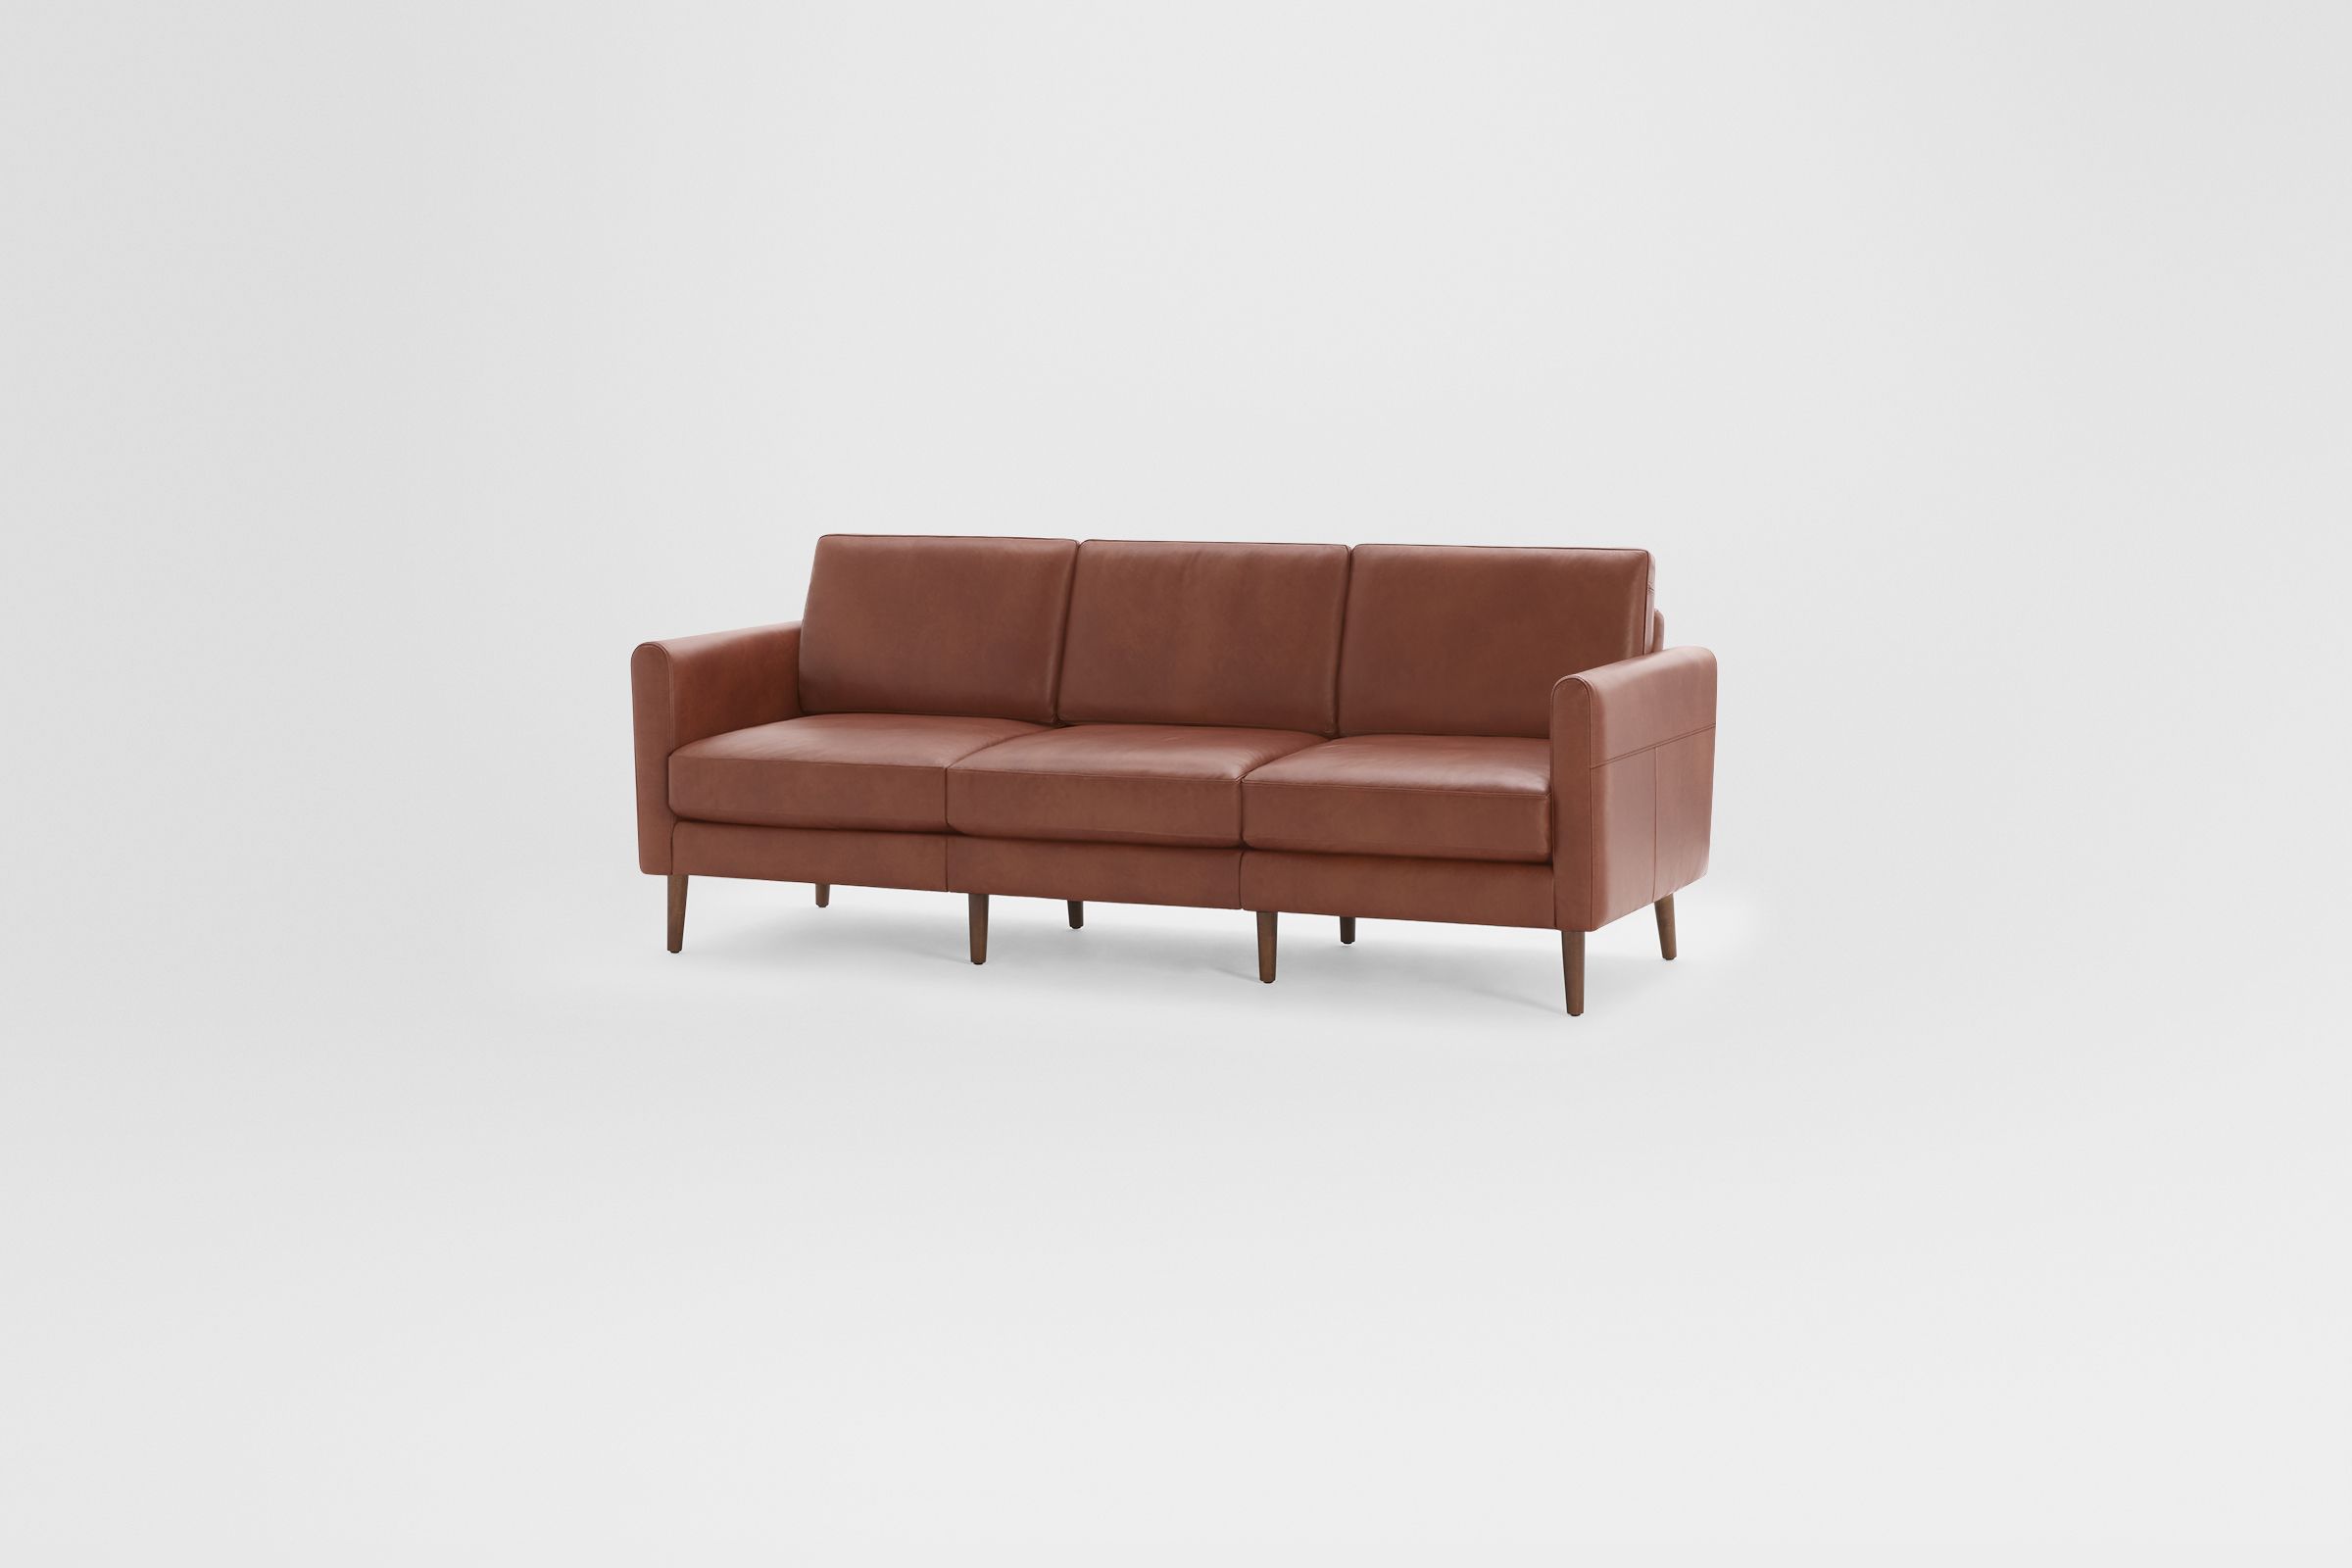 Modern Leather Couches | Burrow | Burrow